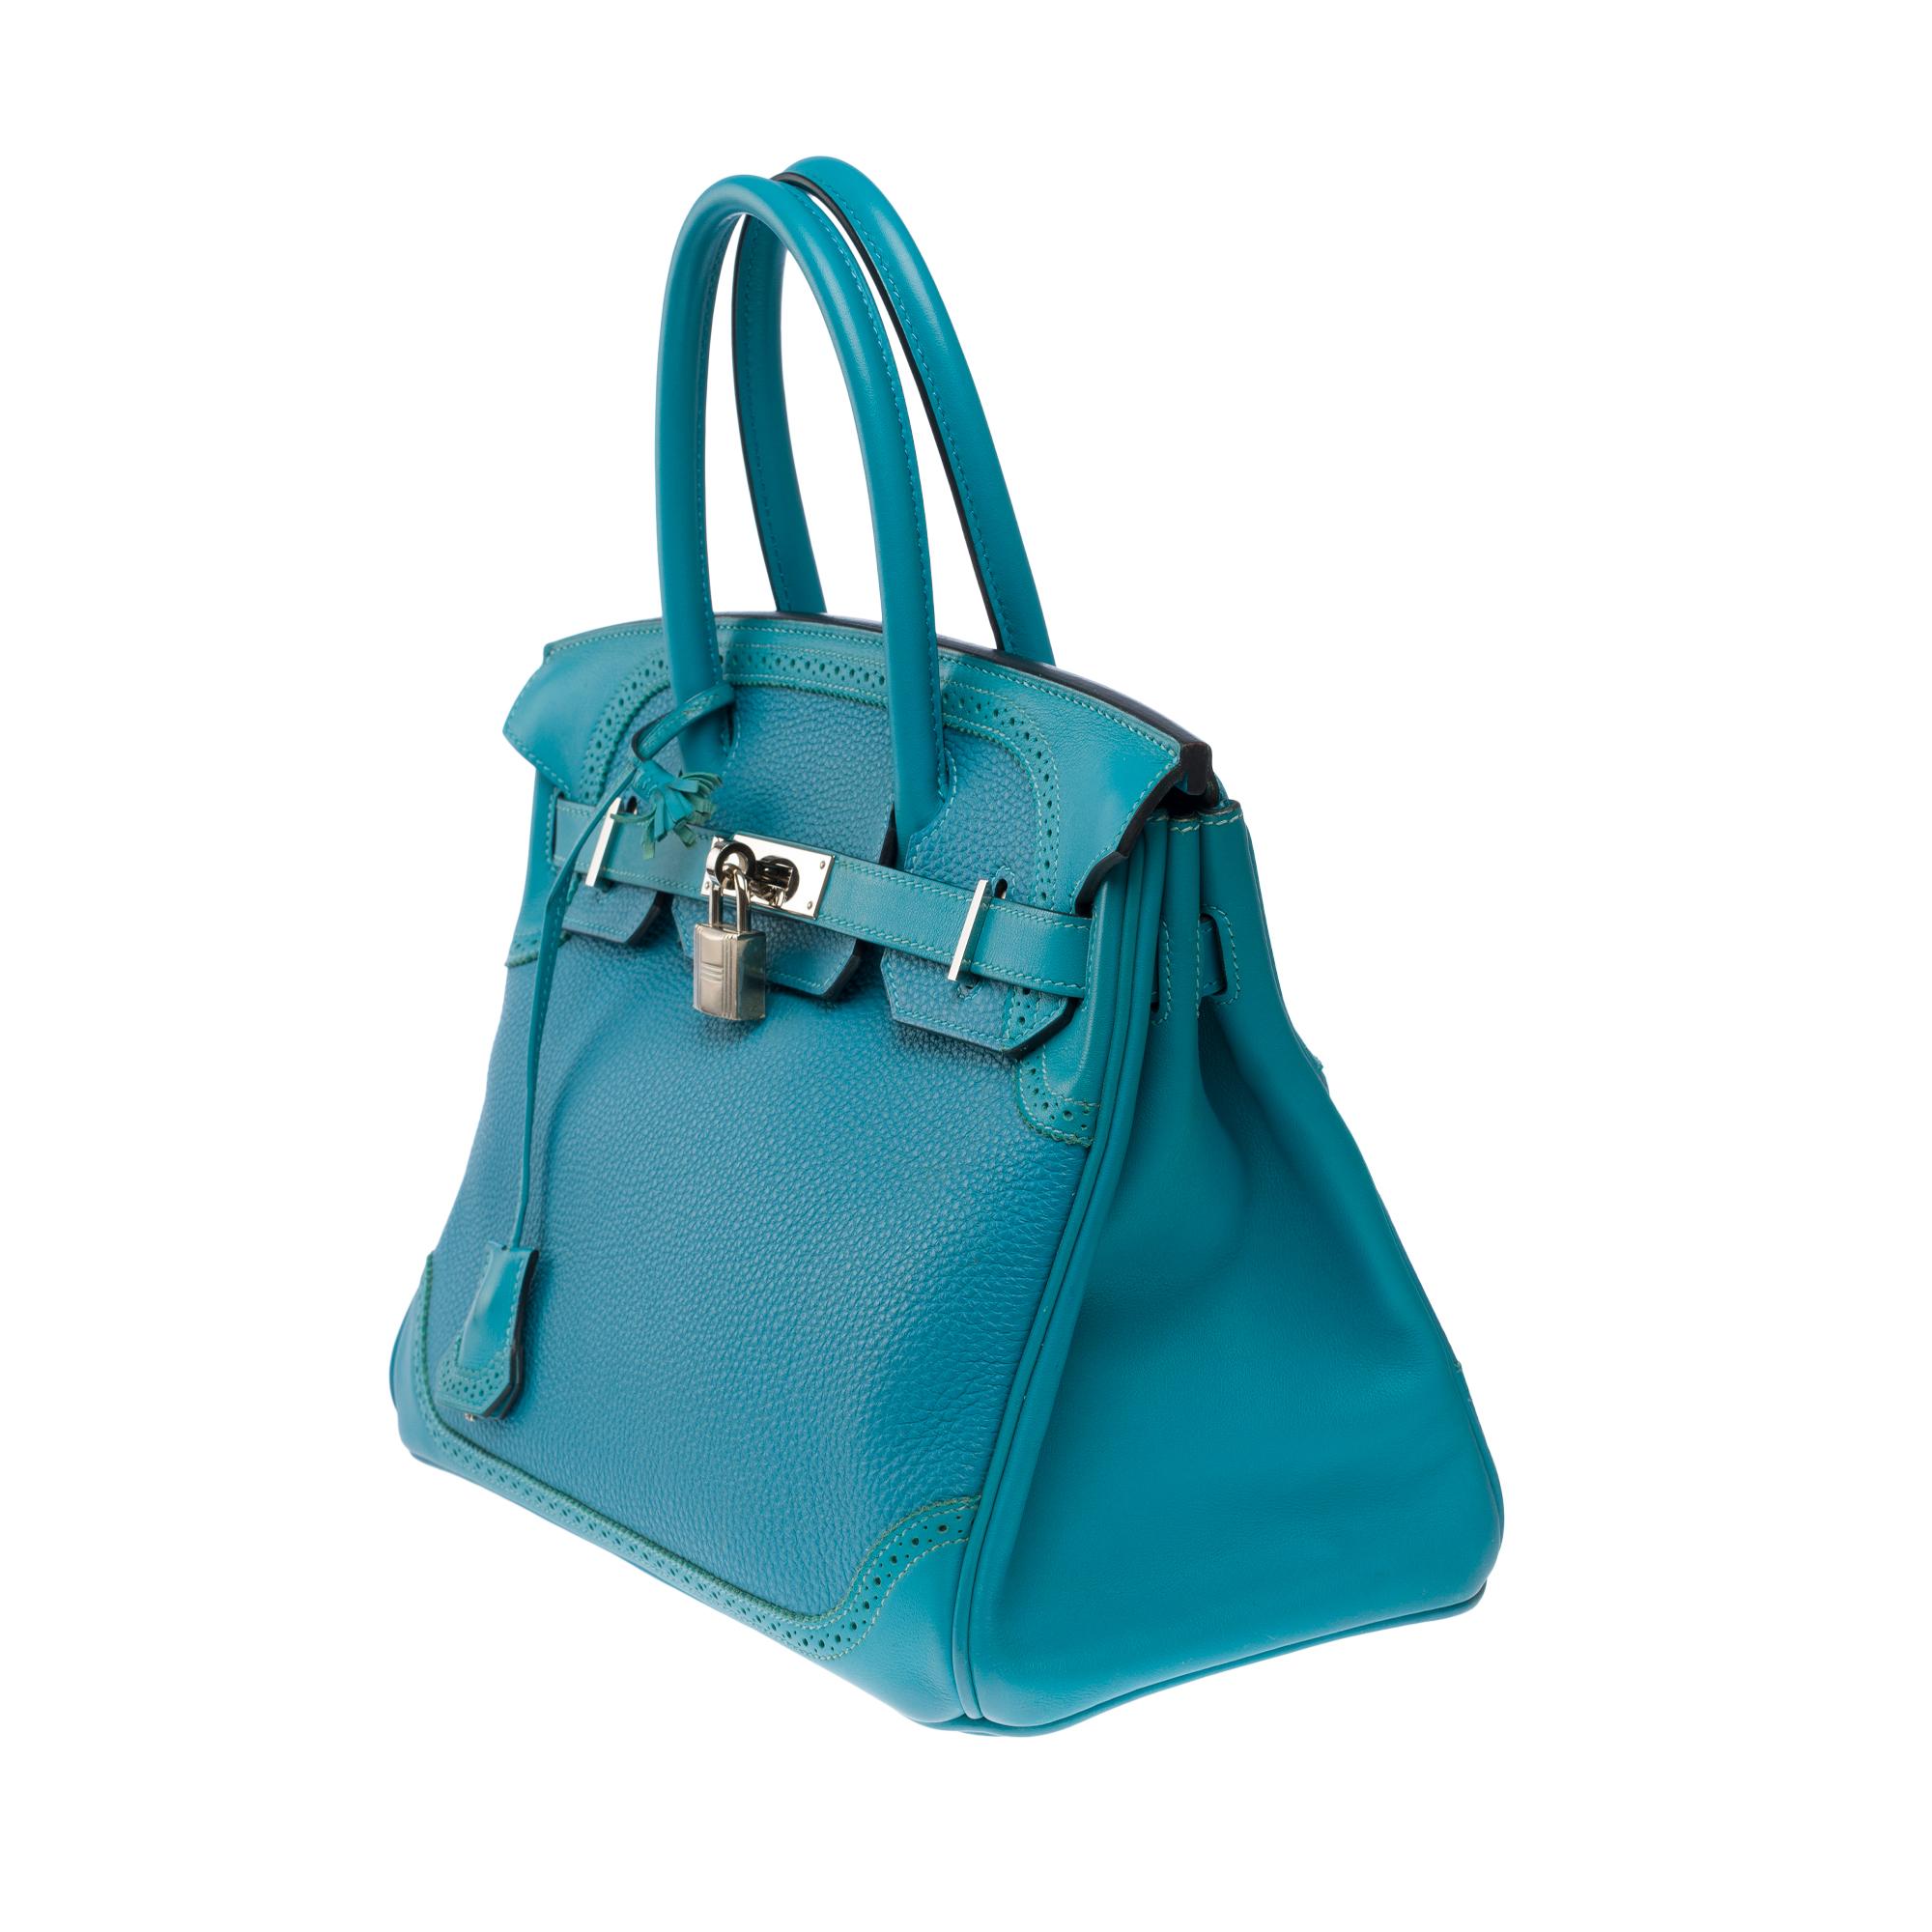 Ghillies Limited Edition Hermes Birkin 30 handbag in Turquoise Blue leather, SHW For Sale 1